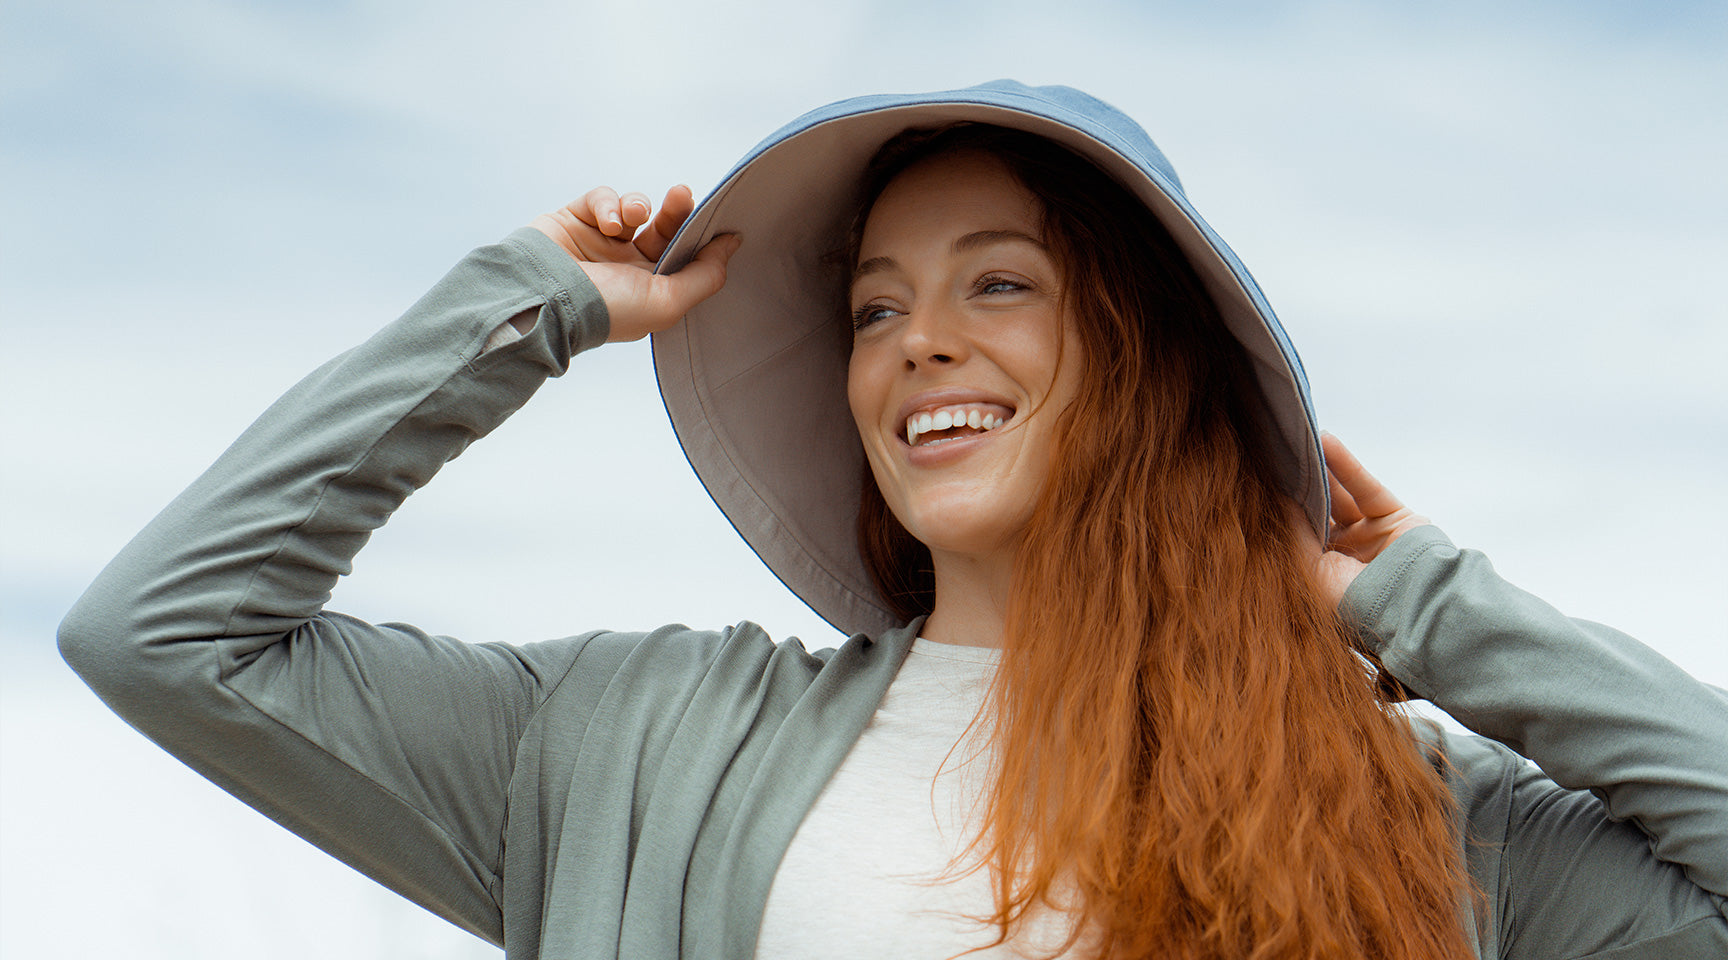 What makes the perfect sun hat for women? – Solbari